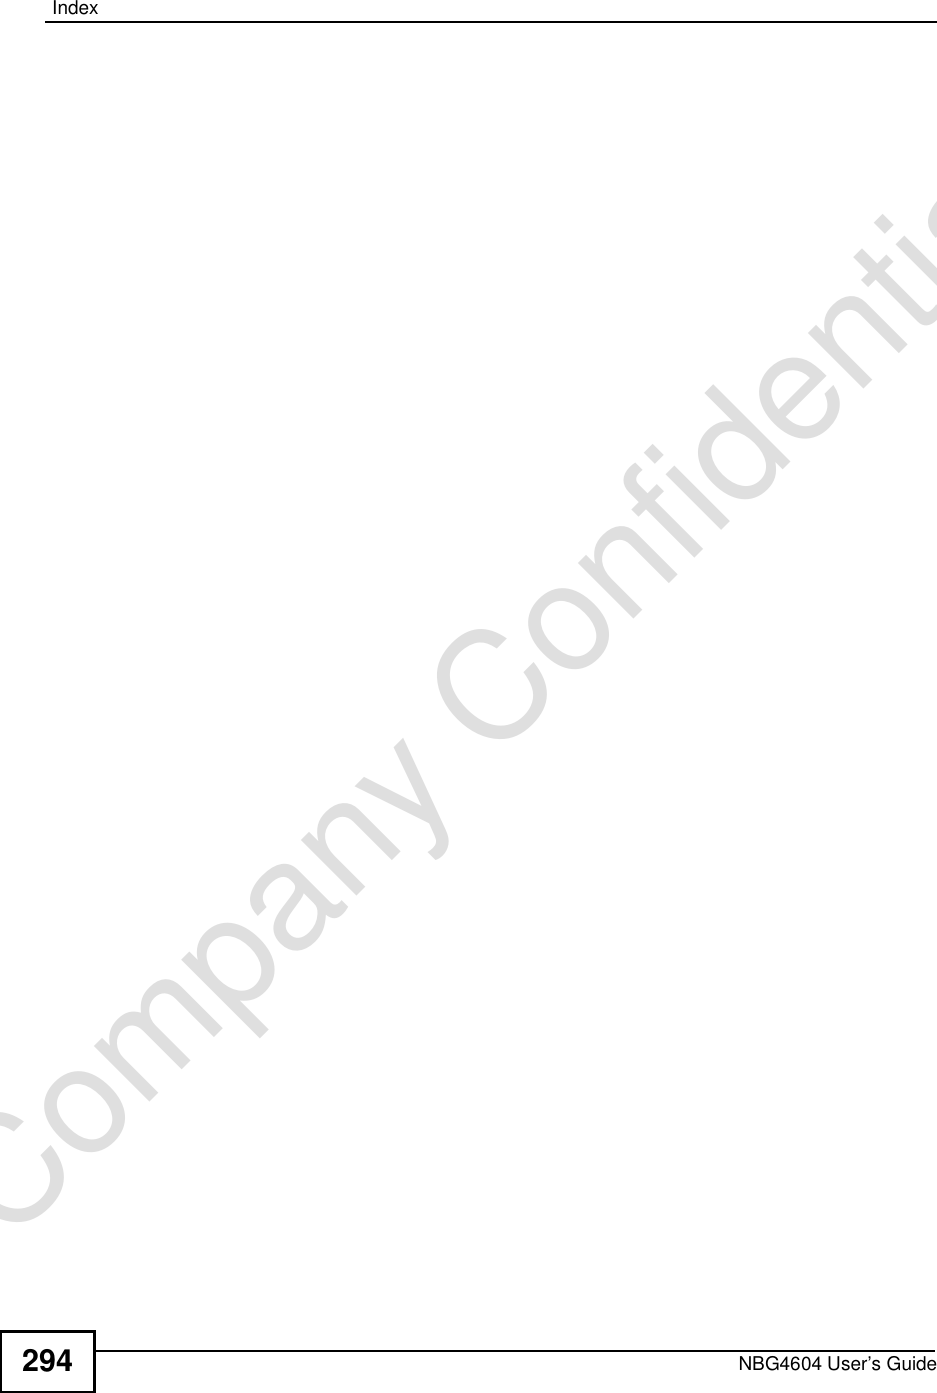 IndexNBG4604 User’s Guide294Company Confidential